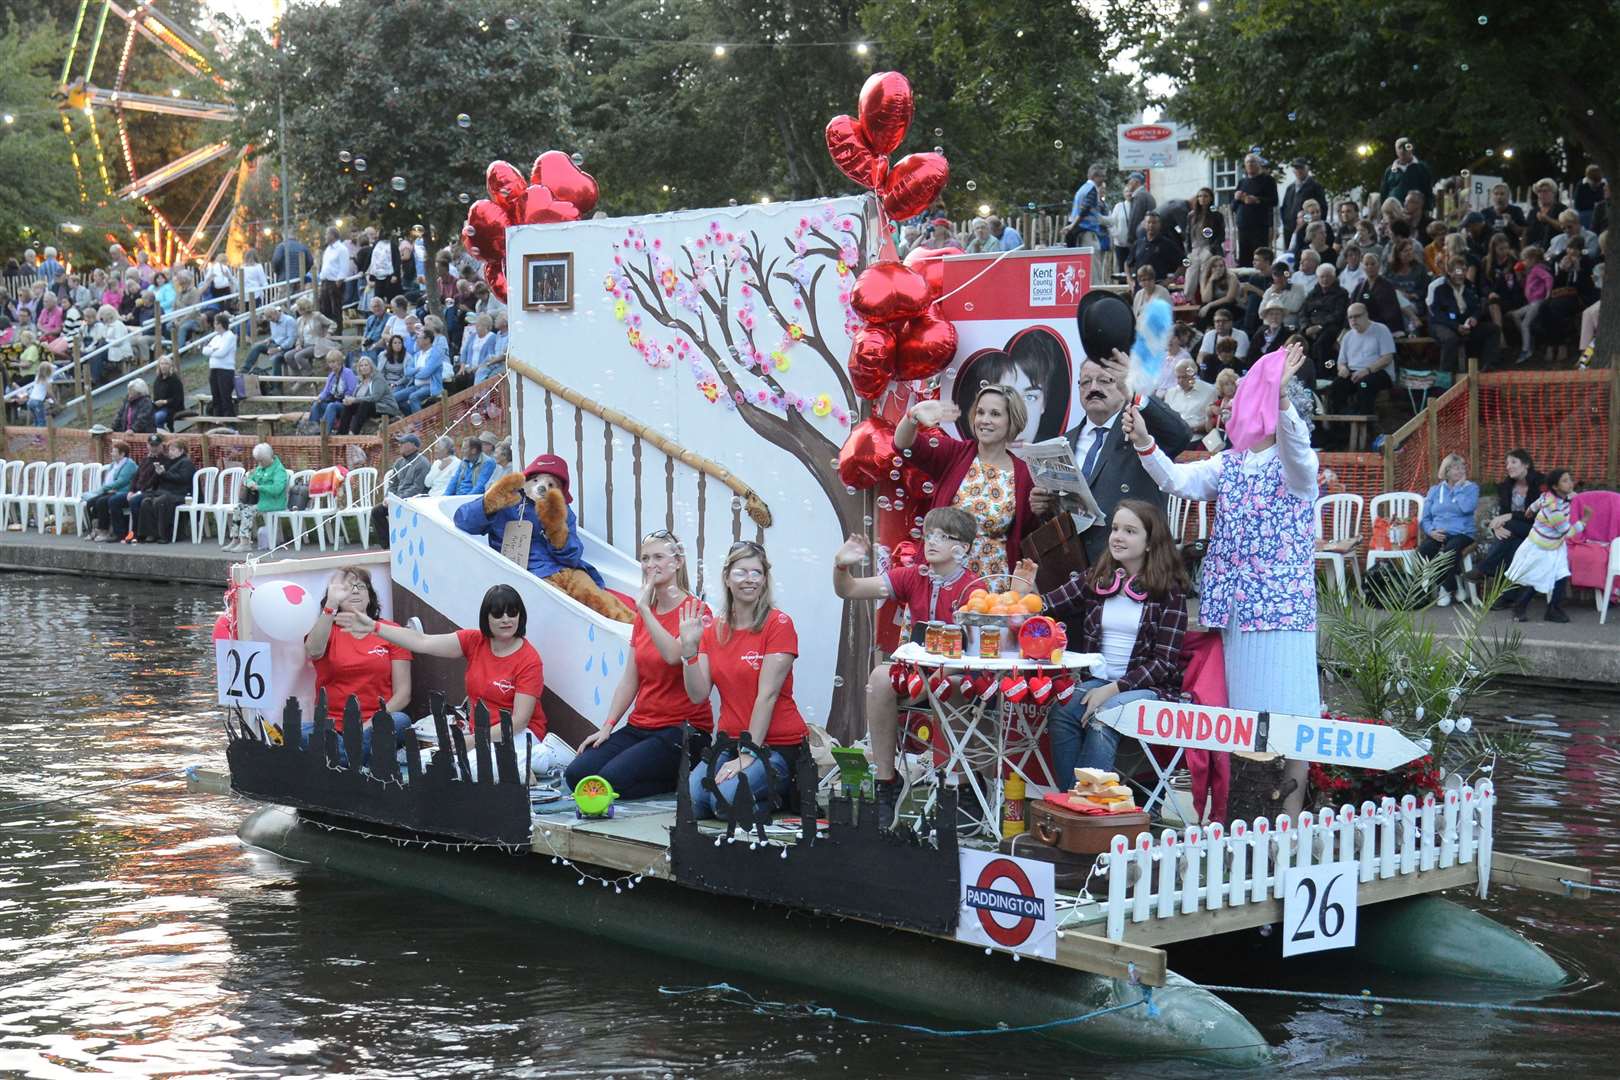 A vast array of floats will set sail down the canal on Wednesday, August 21